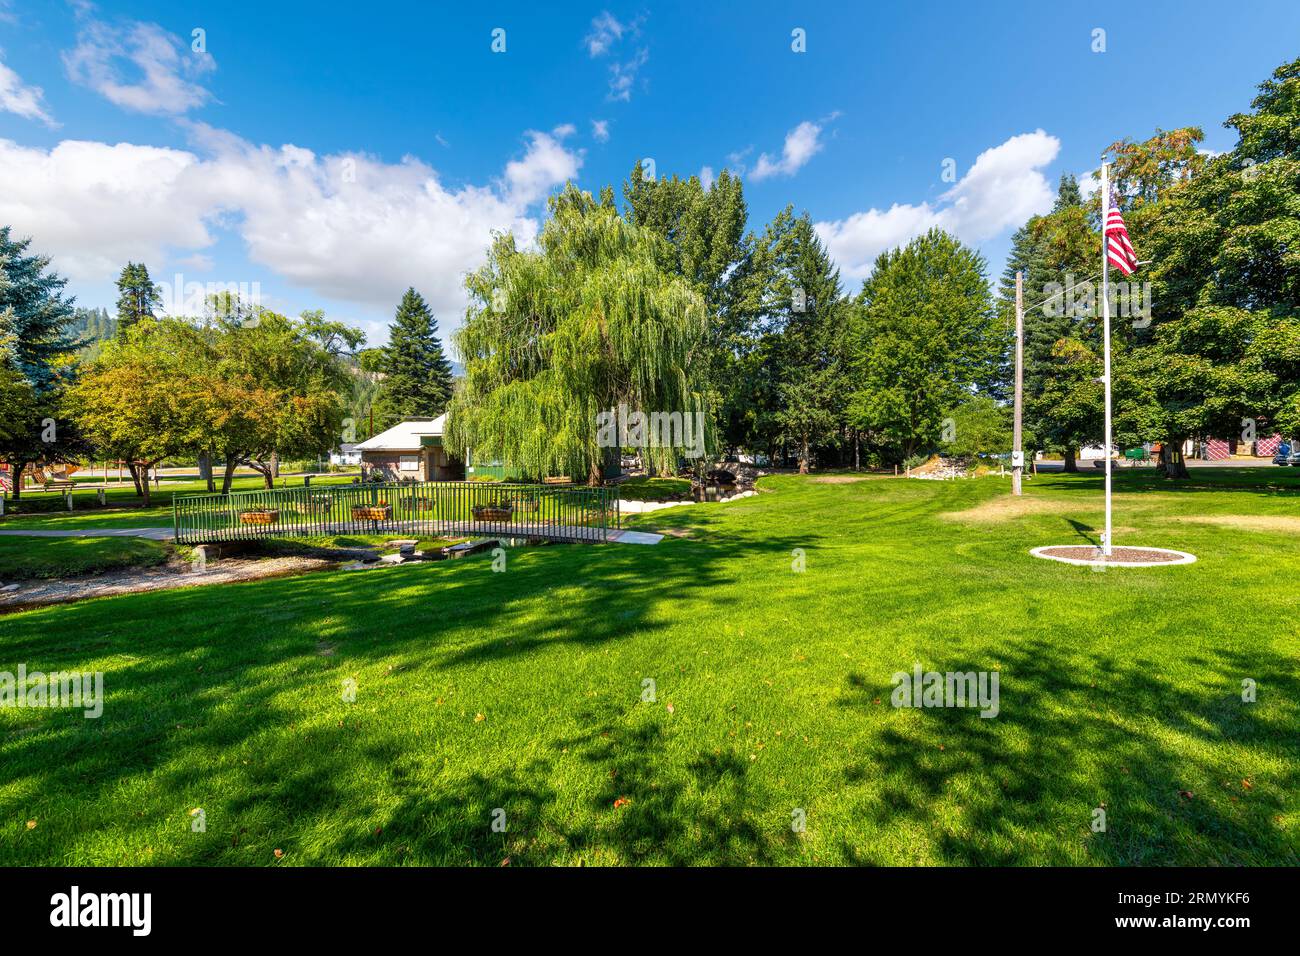 The scenic City Park with stream running through it in the rural town of Rathdrum, Idaho, a suburb of the general Coeur d'Alene area of North Idaho Stock Photo